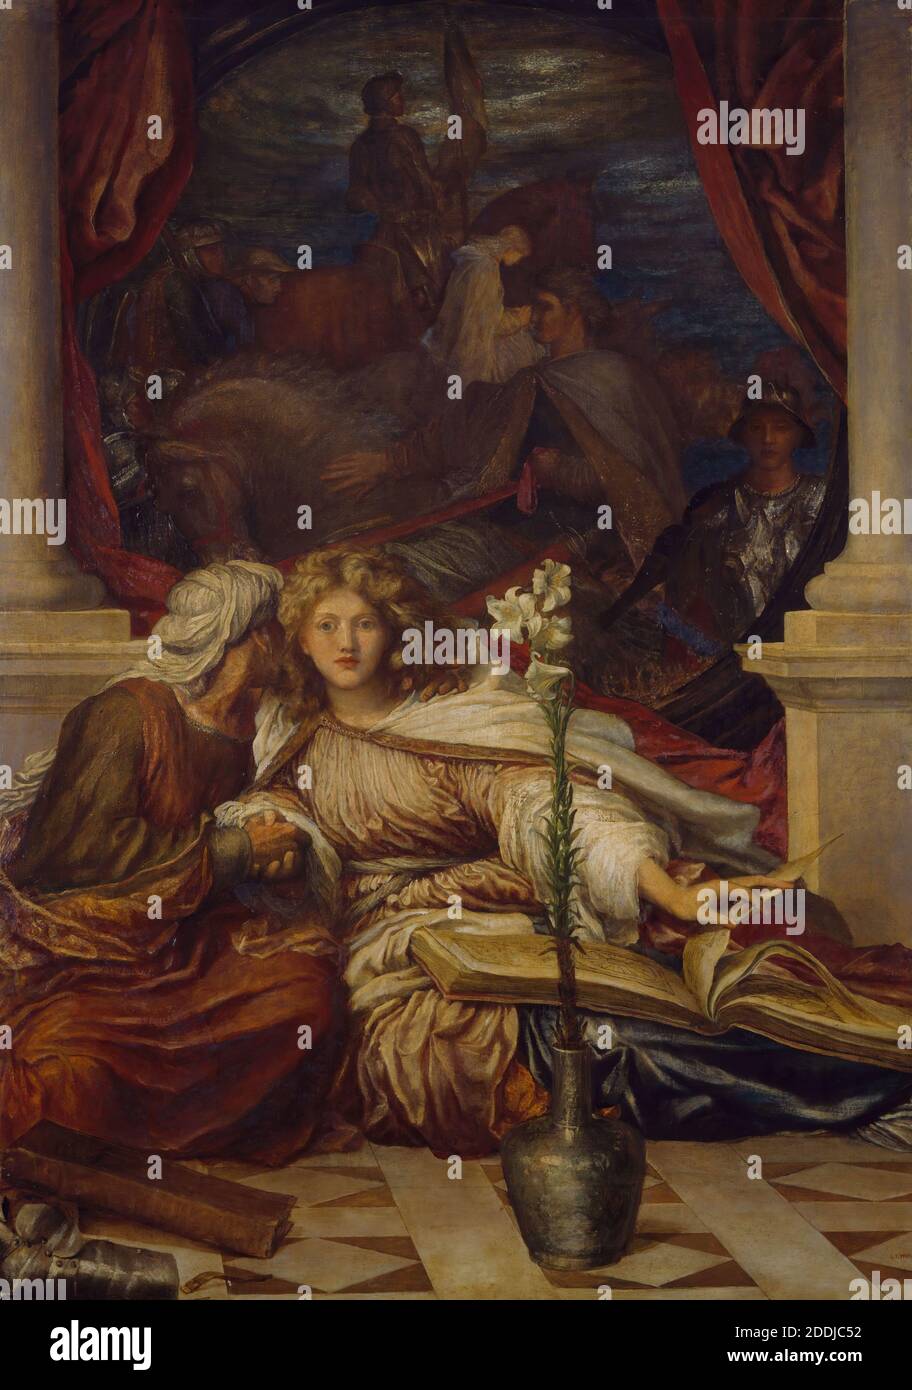 Britomart, 1877-78 George Frederic Watts, The subject is taken from Edmund Spenser's epic poem, 'Faerie Queen', Oil Painting, Female, Literature, Poetry, Literature, Character, Flower, Lily Stock Photo